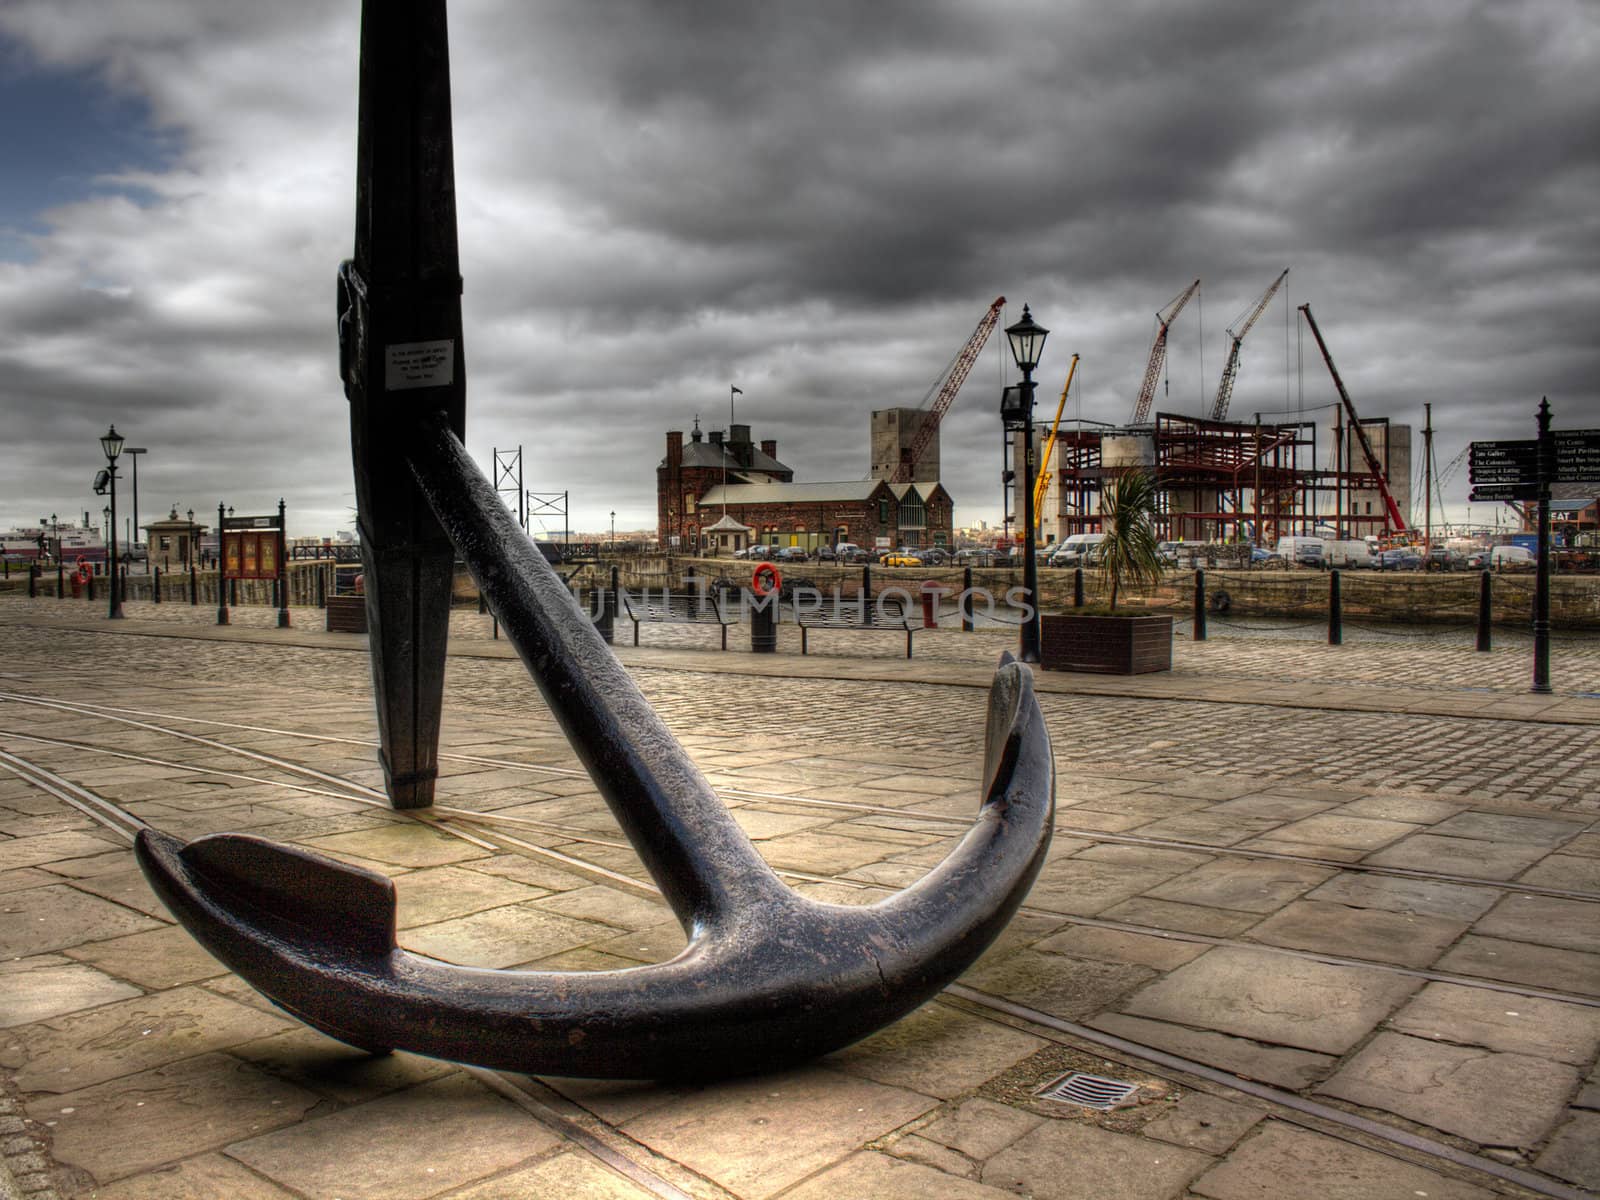 HDR image of a very large ships anchor in Liverpool UK.